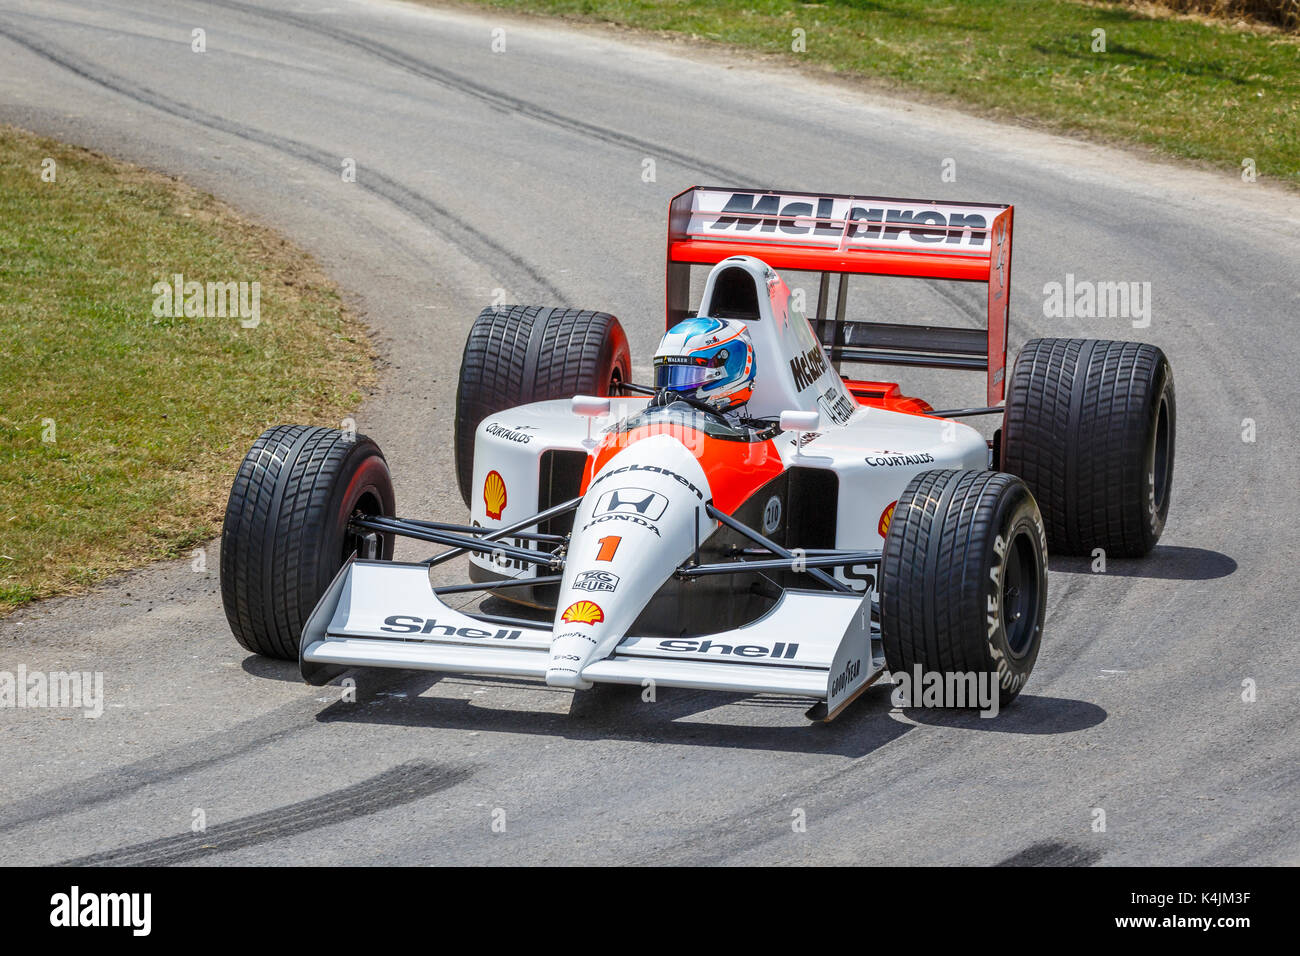 1991 Mclaren Honda Mp4 6 F1 Car With Driver Nyck De Vries At The 17 Goodwood Festival Of Speed Sussex Uk Stock Photo Alamy